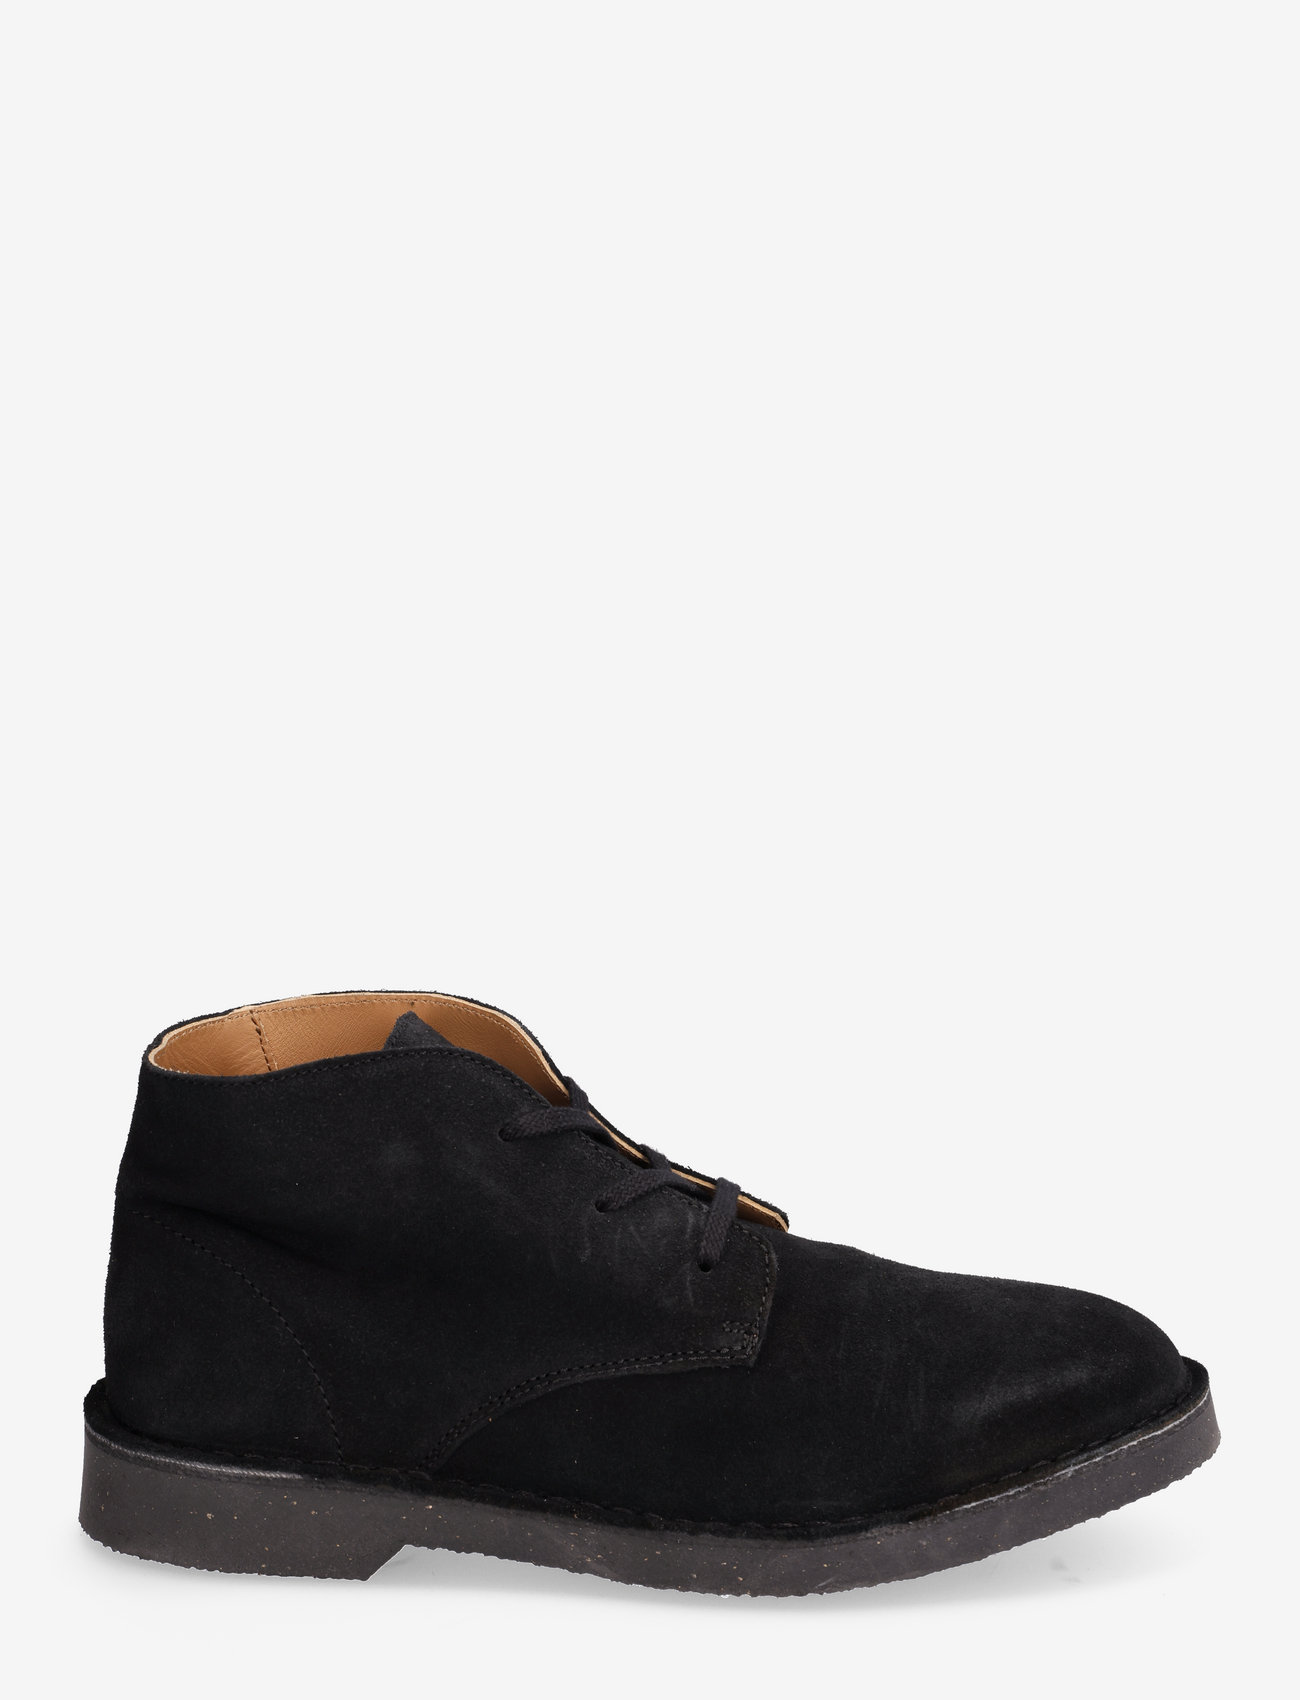 Selected Homme - SLHRIGA NEW SUEDE CHUKKA BOOT B - boots - black - 1